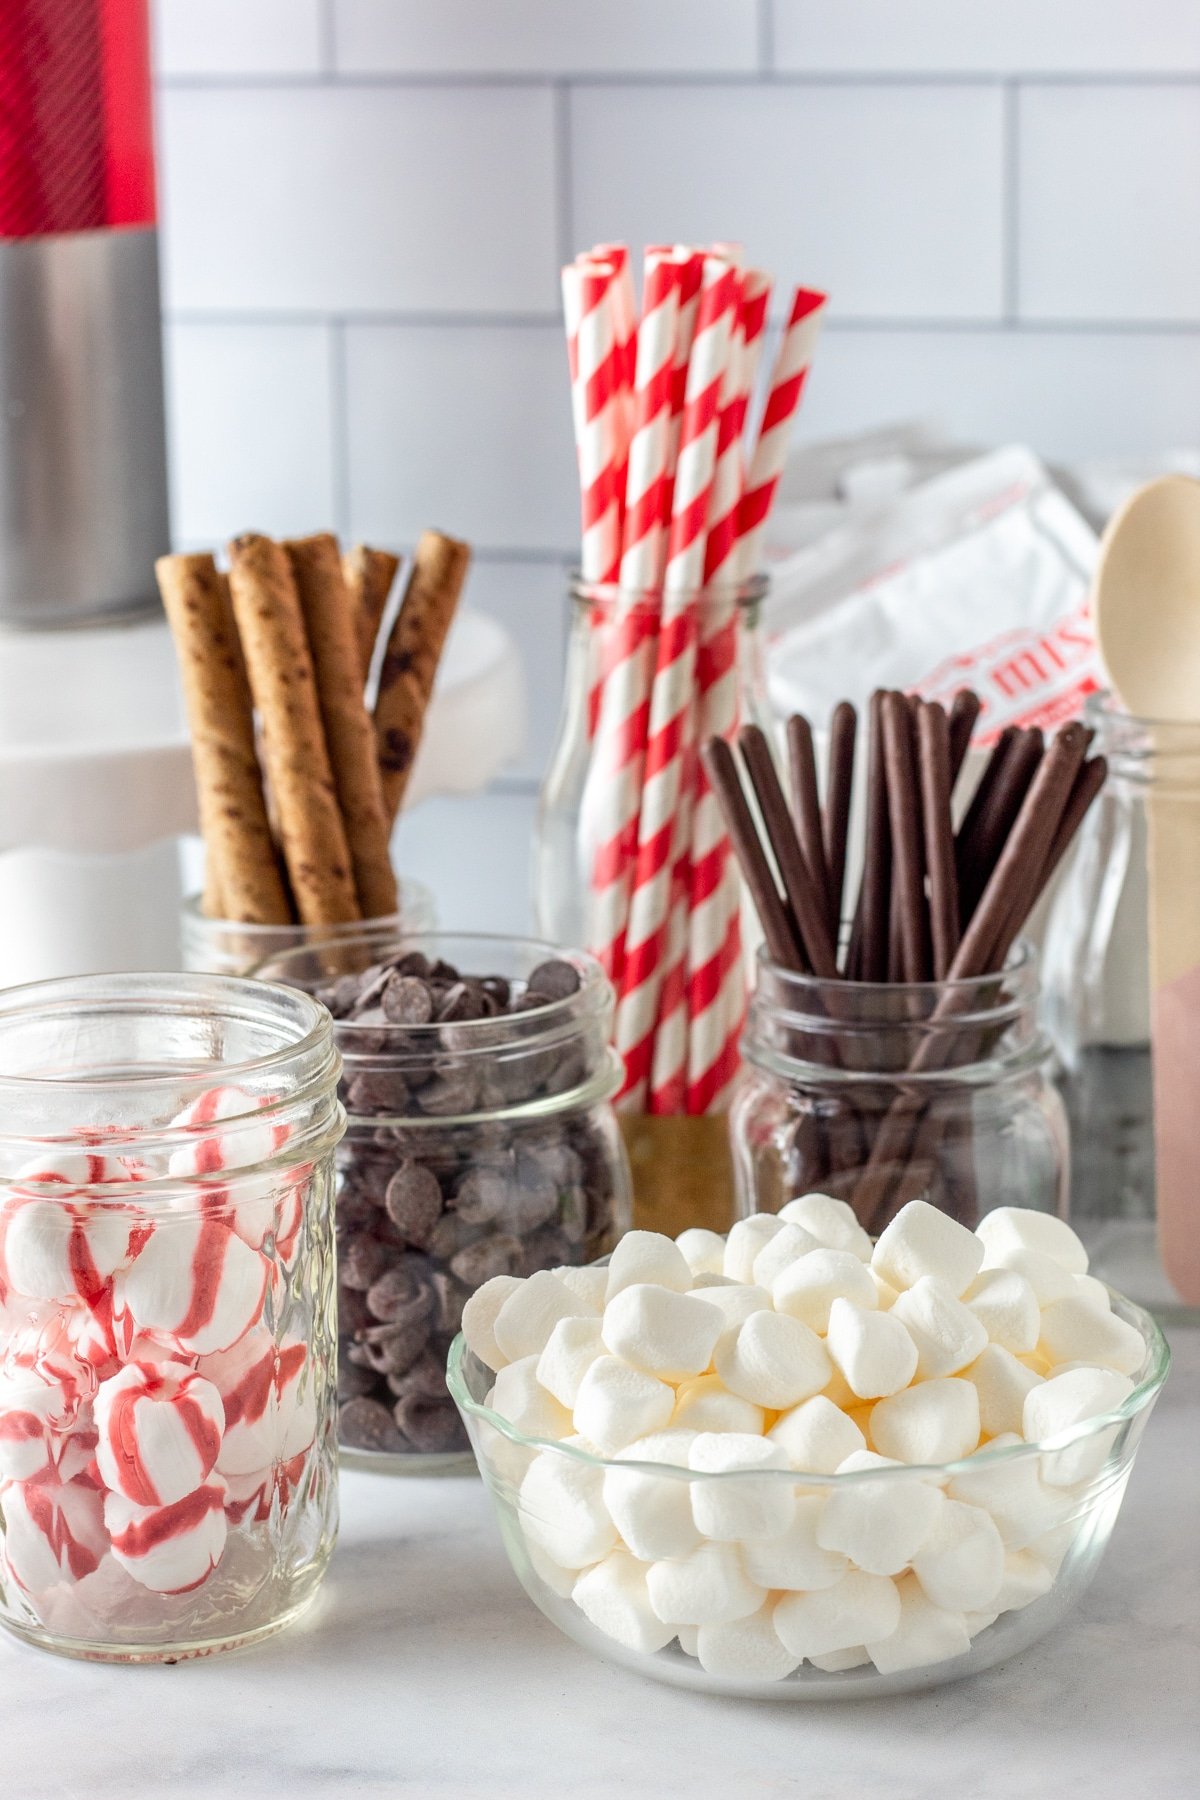 Hot cocoa bar toppings in glass bowls and jars - marshmallows, candy canes, etc. 